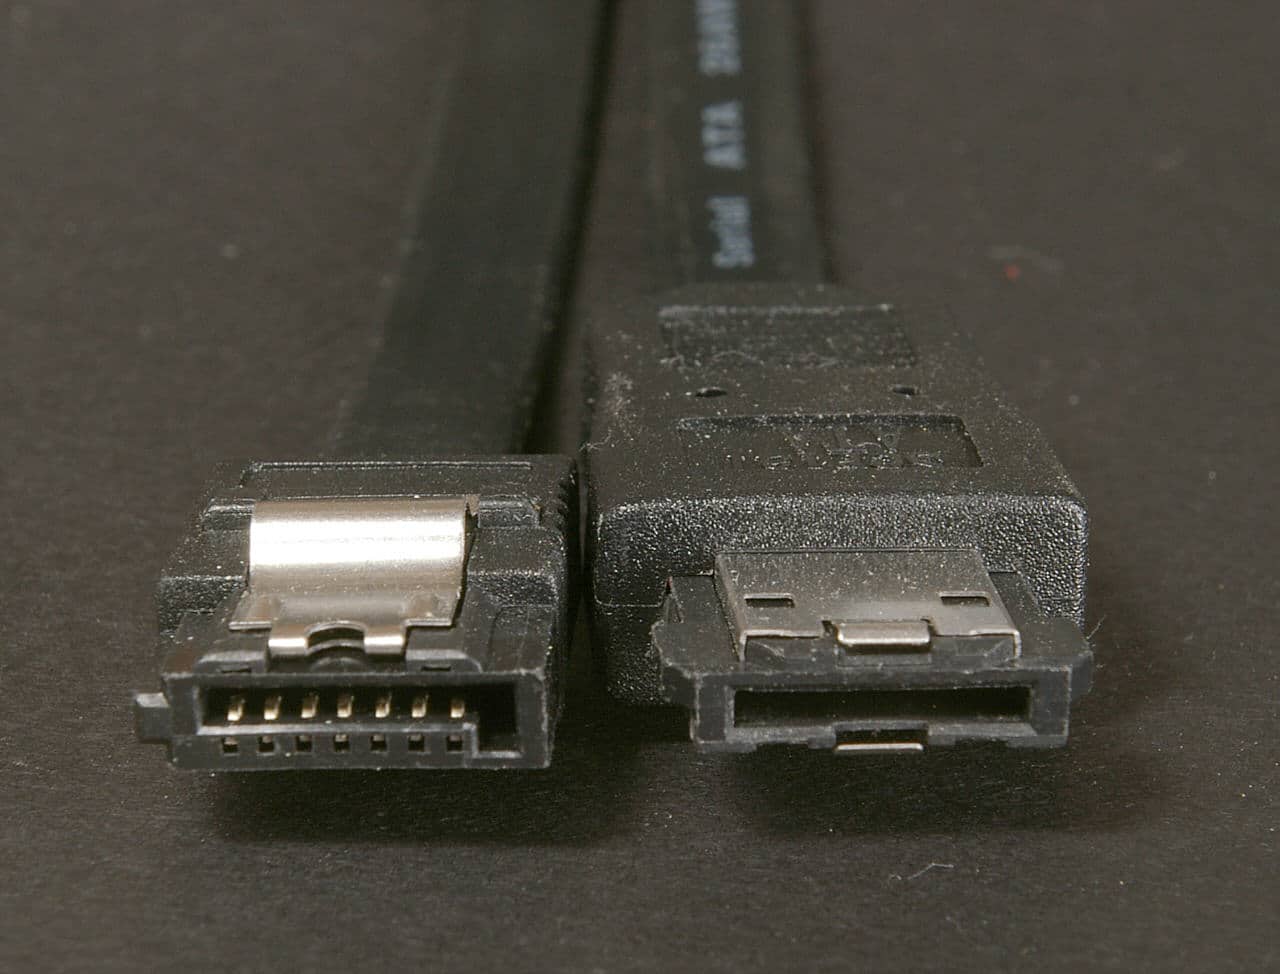 SATA and eSATA side by side